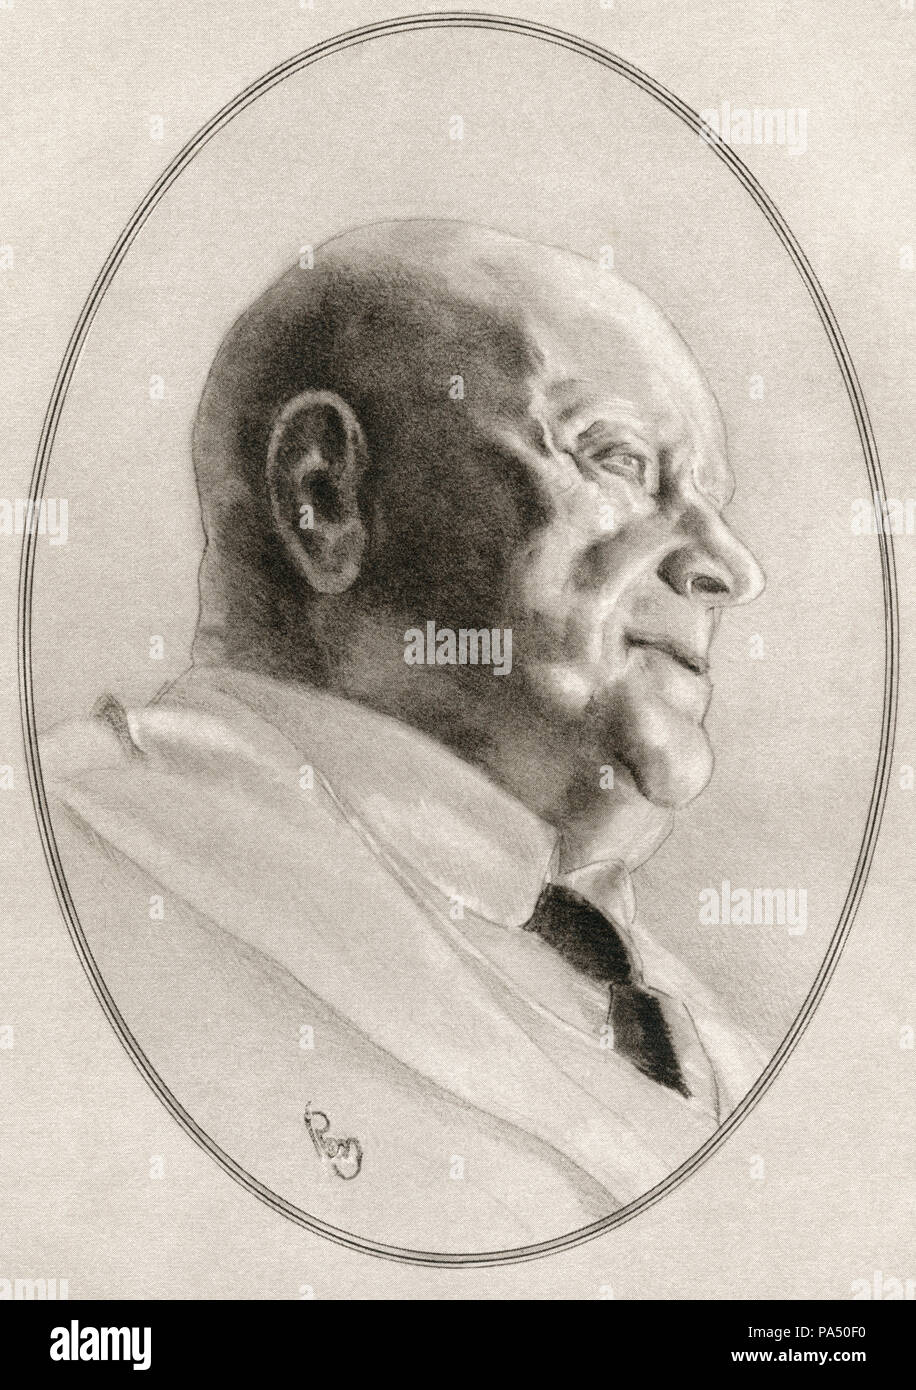 Jean Sibelius, born Johan Julius Christian Sibelius, 1865 – 1957.  Finnish composer and violinist.   Illustration by Gordon Ross, American artist and illustrator (1873-1946), from Living Biographies of Great Composers. Stock Photo